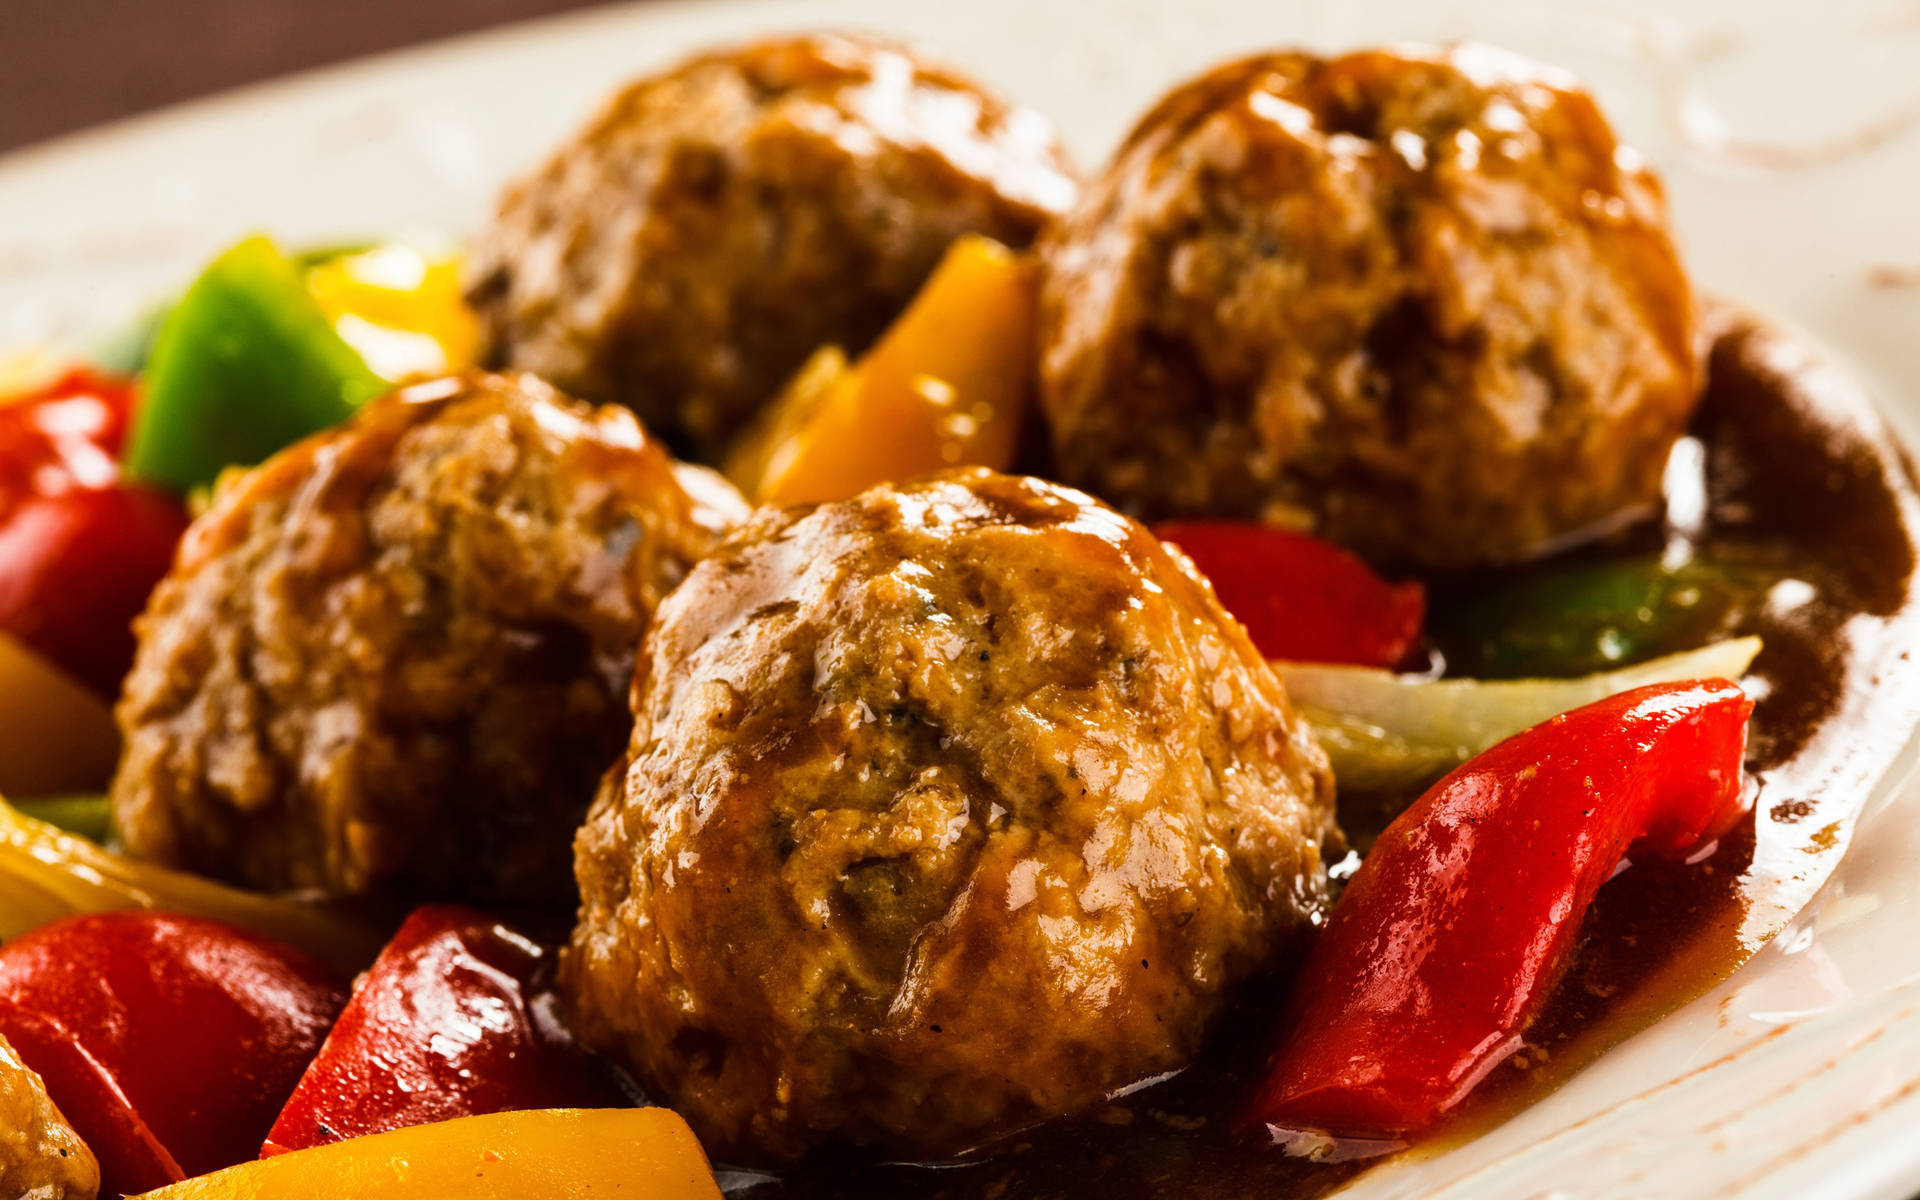 A Delectable Close-up Of Meat Balls In Tomato Sauce With Bell Pepper